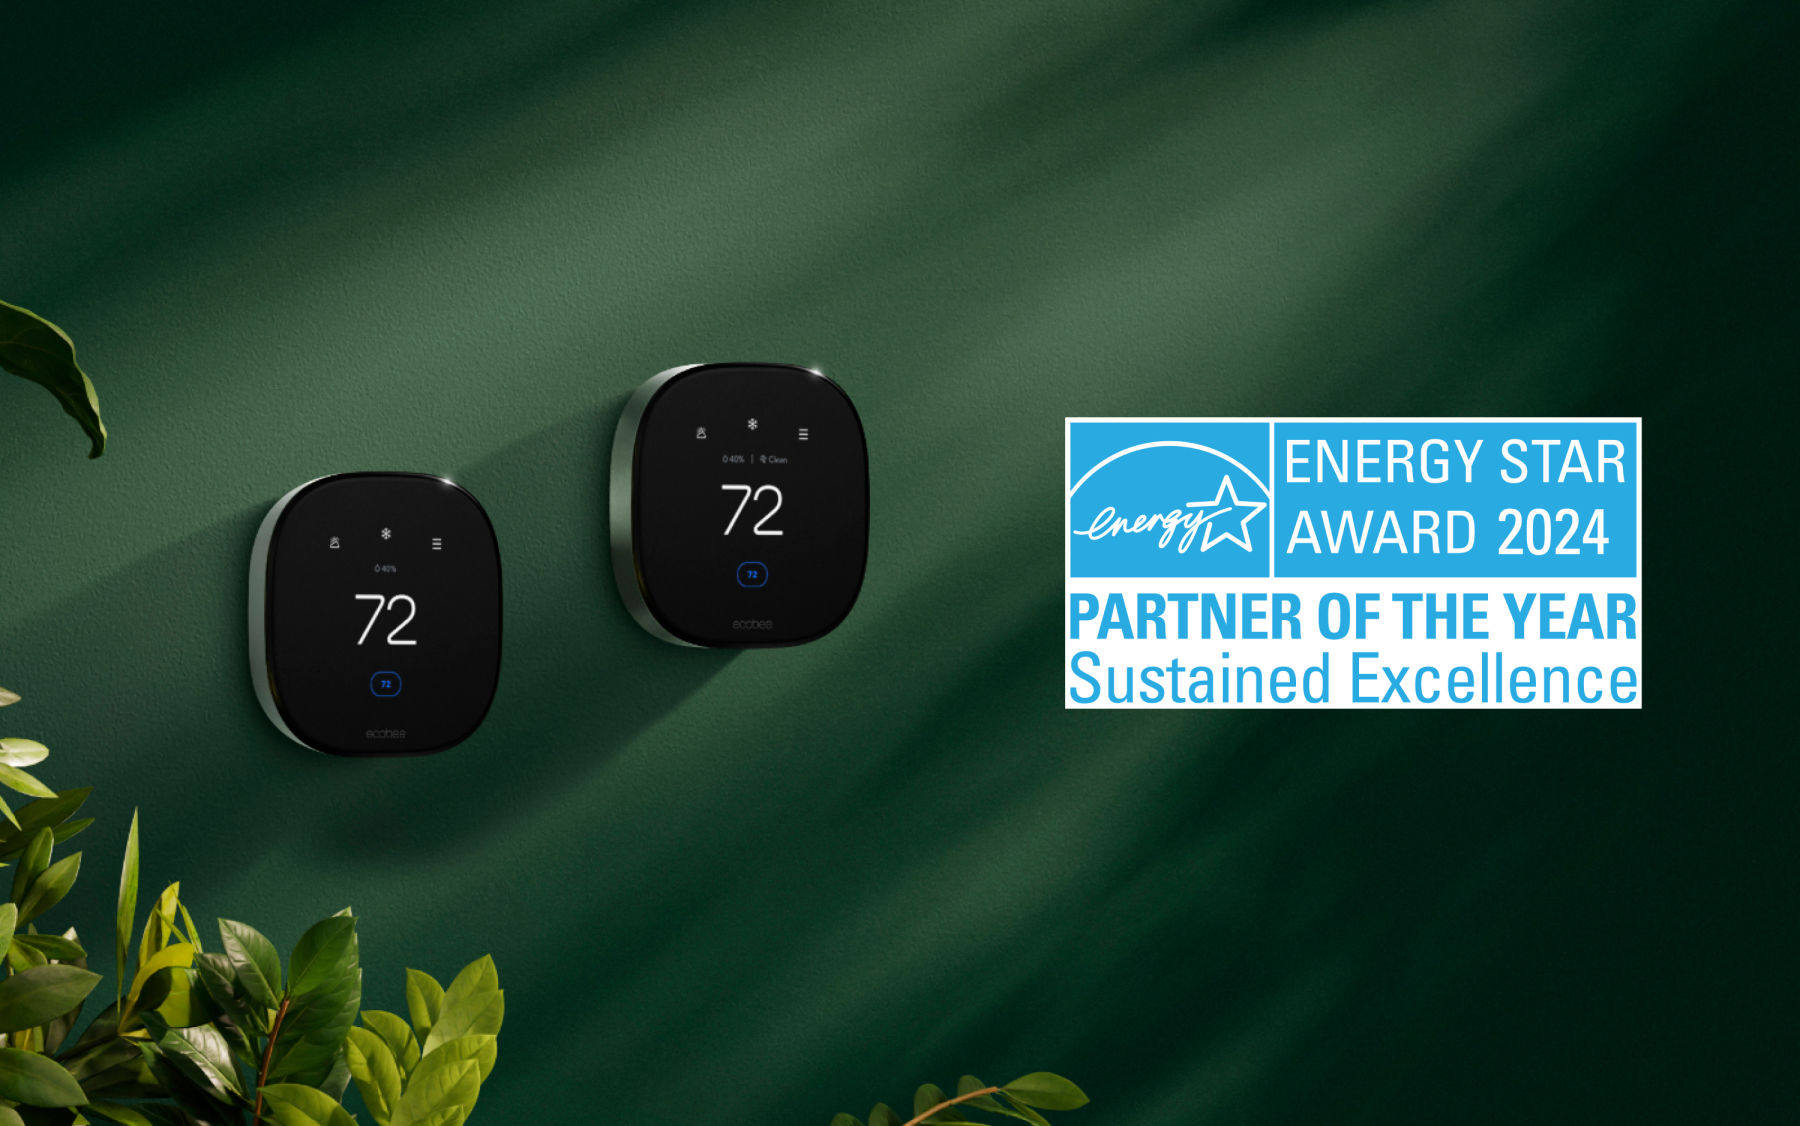 Two ecobee smart thermostats against green wall with ENERGY STAR Award 2024 Partner of the Year badge for Sustained Excellence.